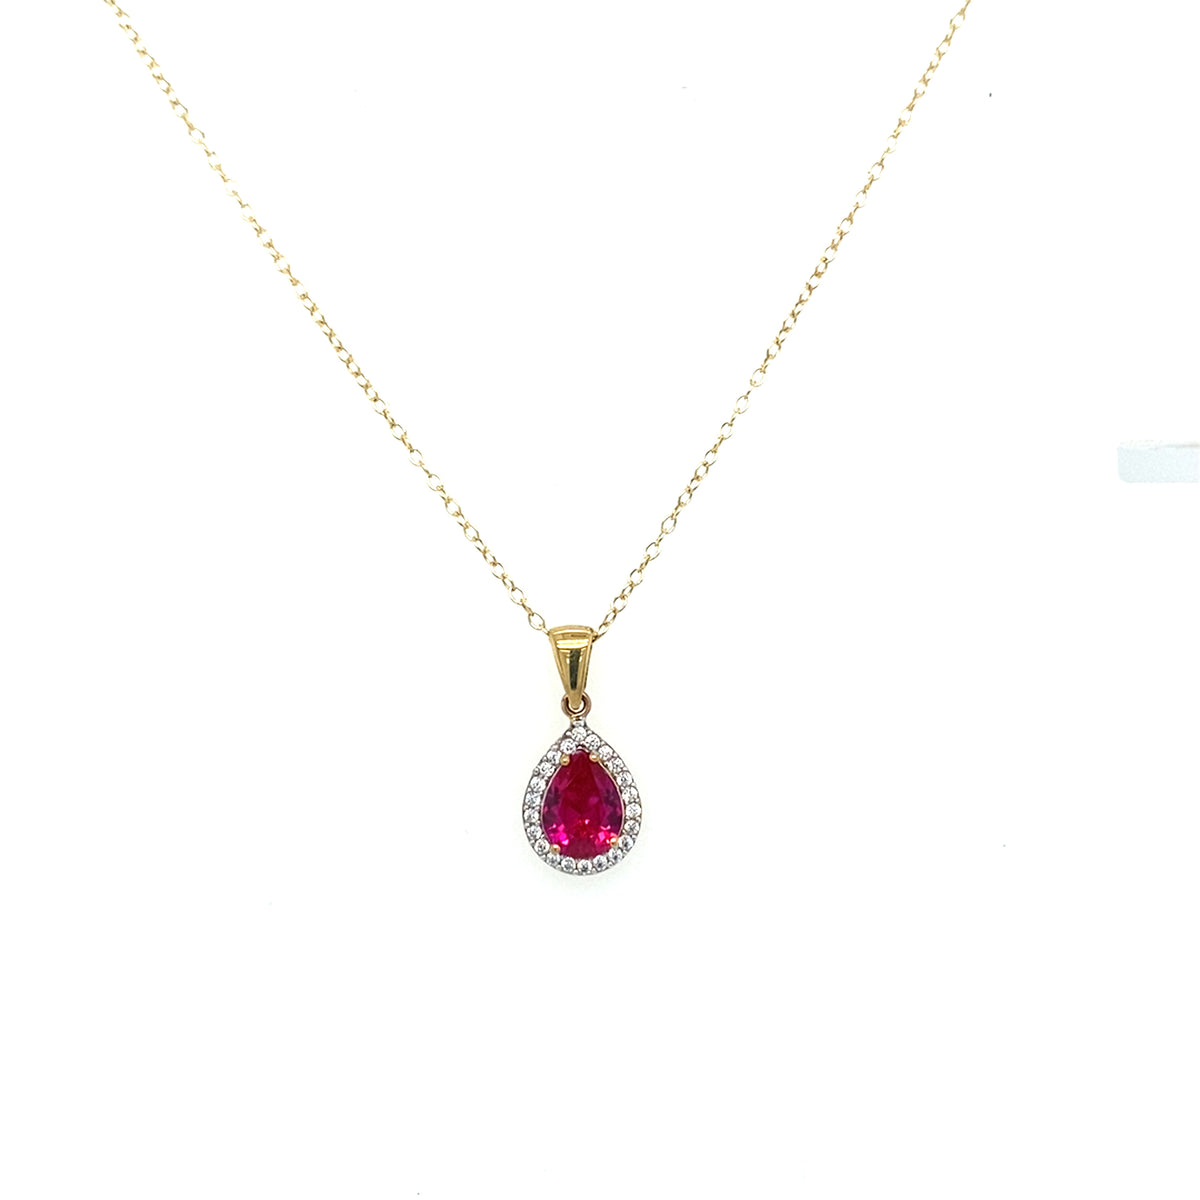 9kt Gold Pear Shaped Pendant with Ruby Coloured Stone